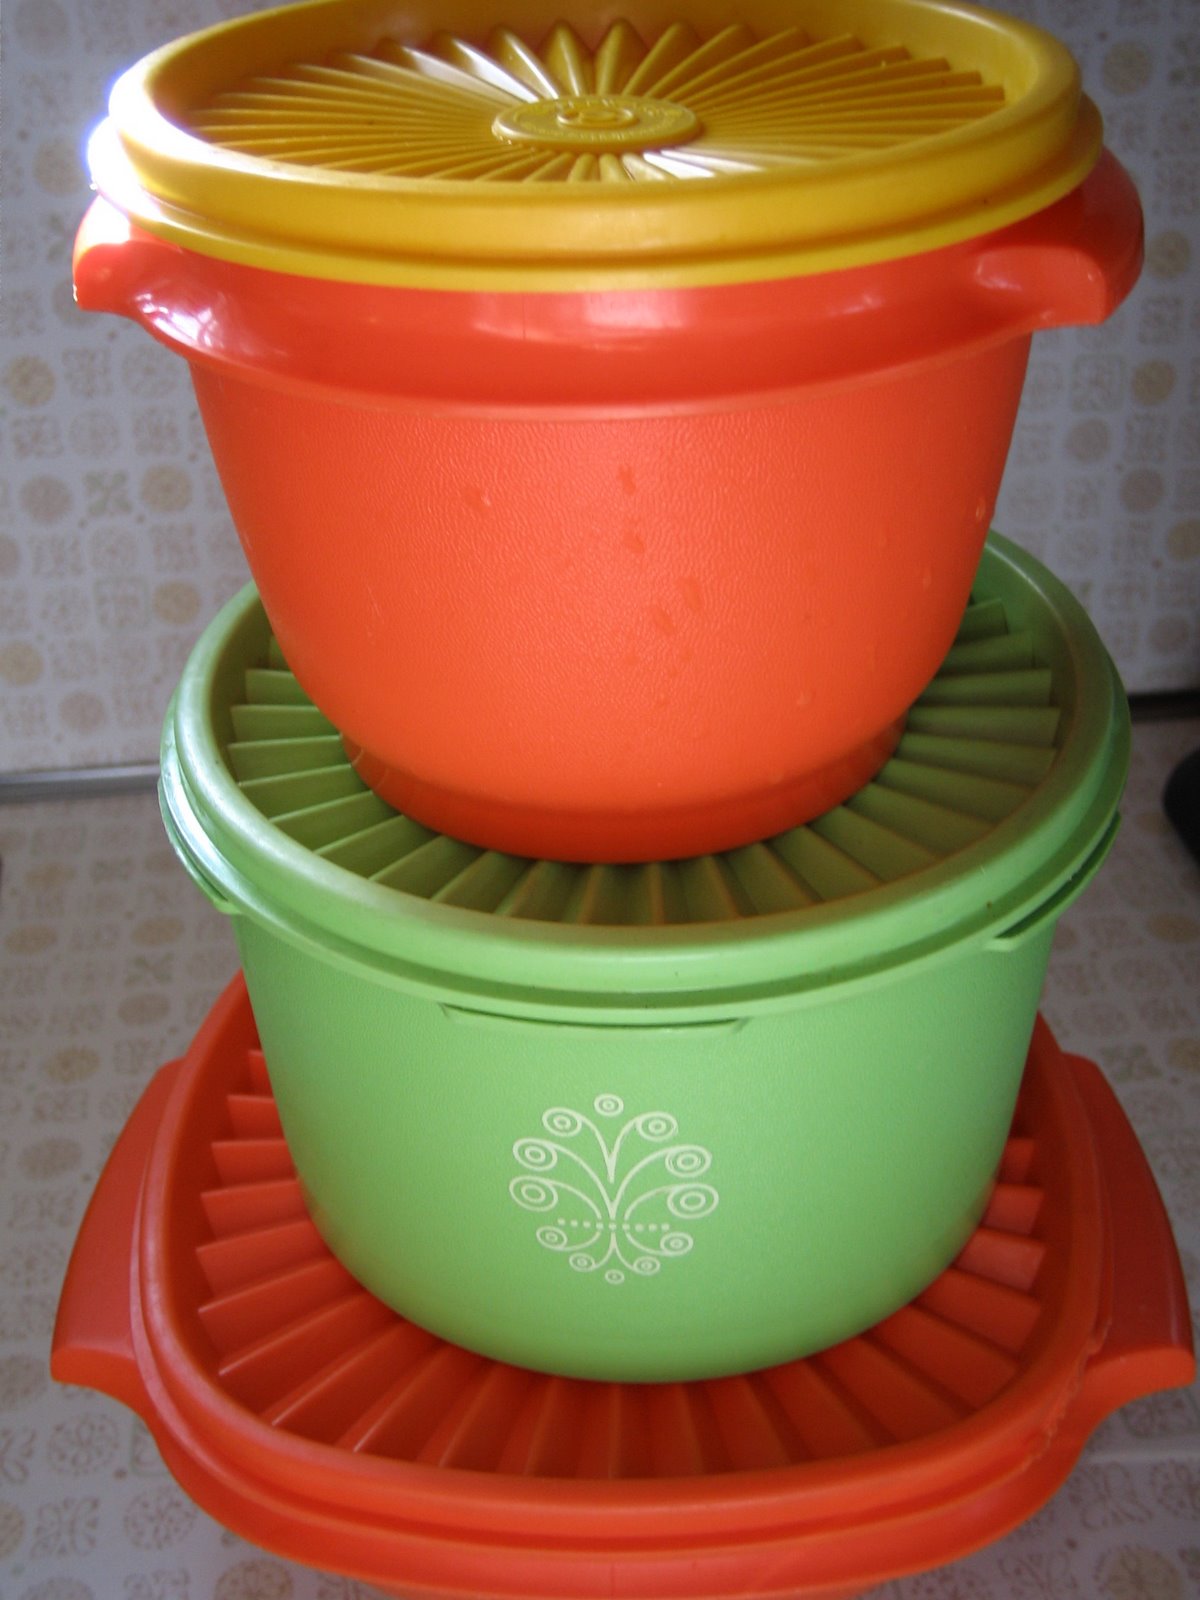 Forinden trojansk hest dome 991 Really, really old Tupperware - 1000 Awesome Things